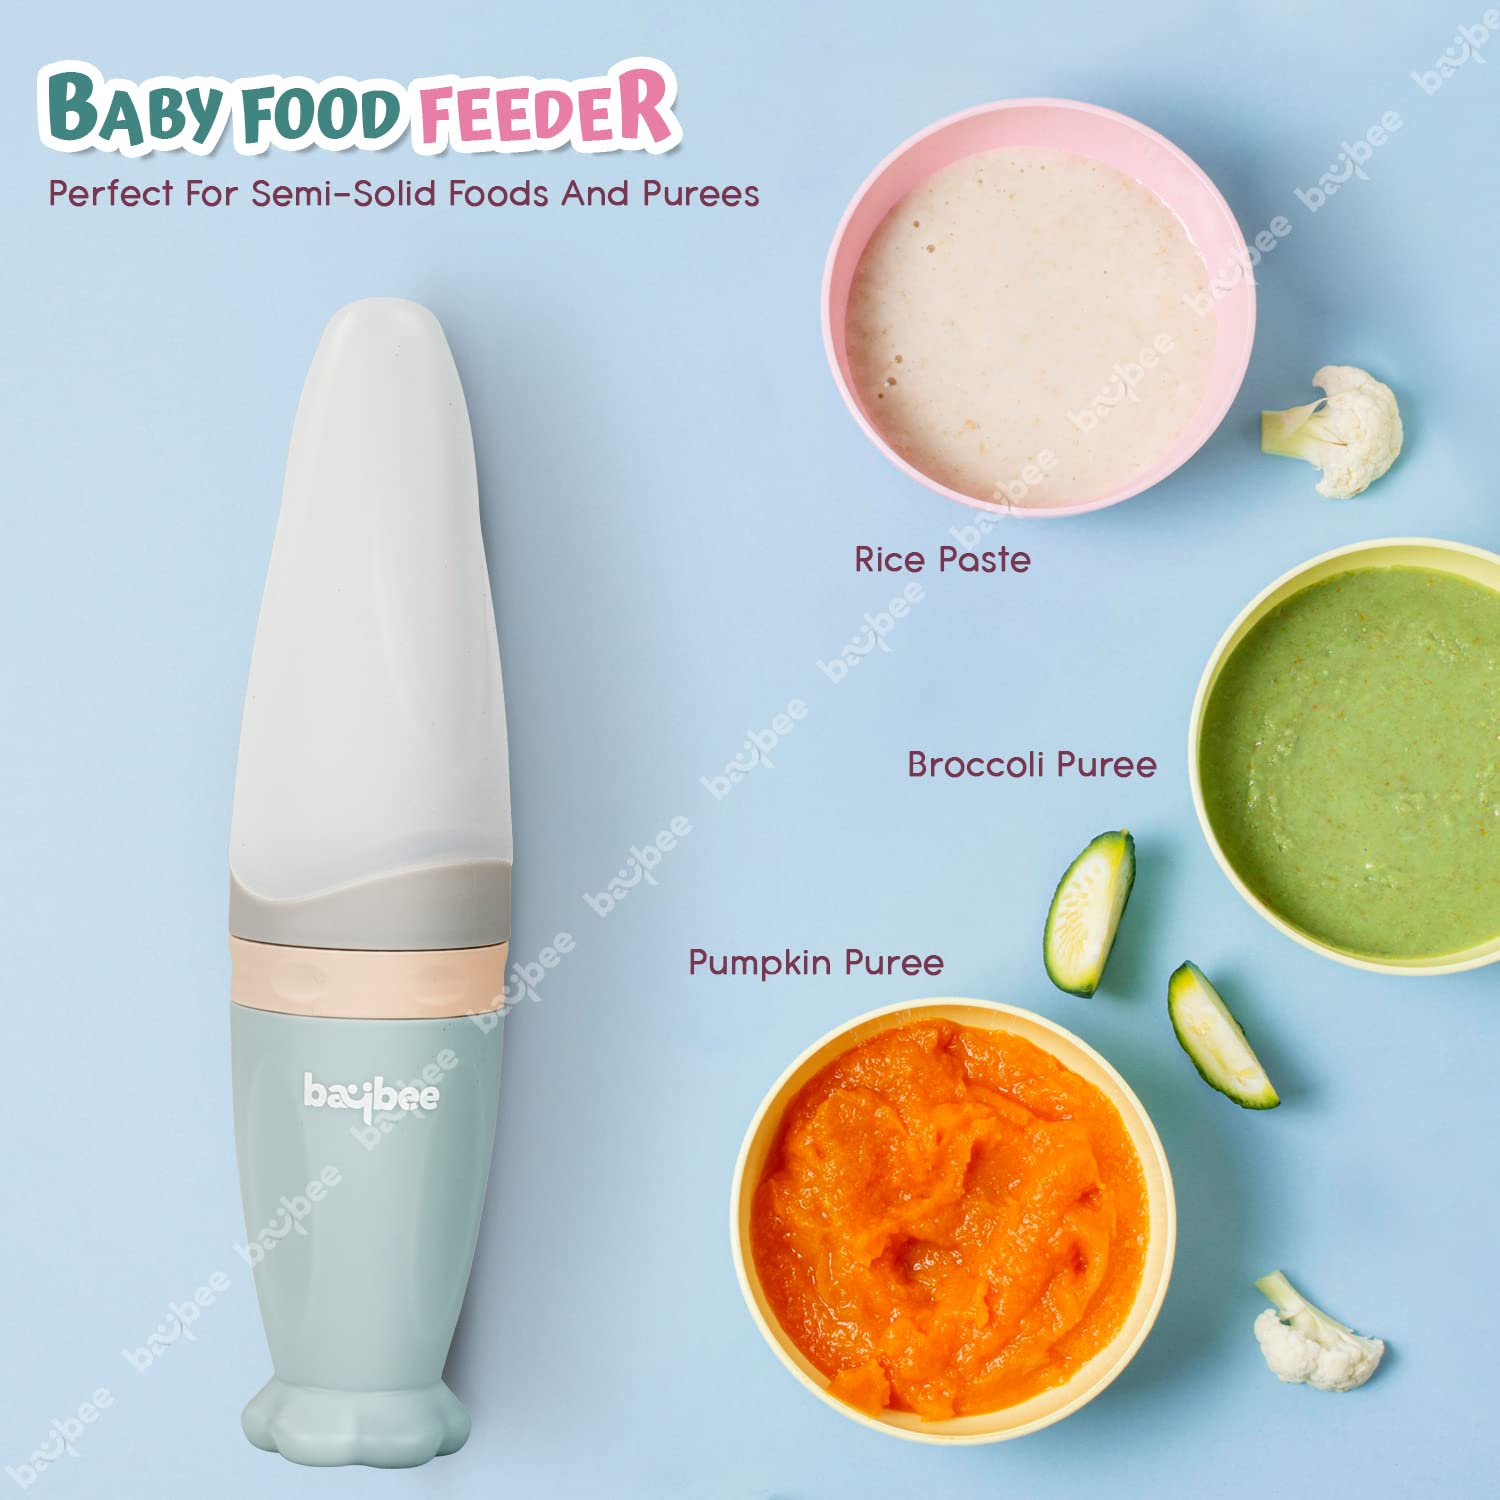 Silicone Food Feeder for Baby I Semi-Solid Food, Cereals, Puree Feeder I Anti-Colic & BPA Free for Infants I 3M+